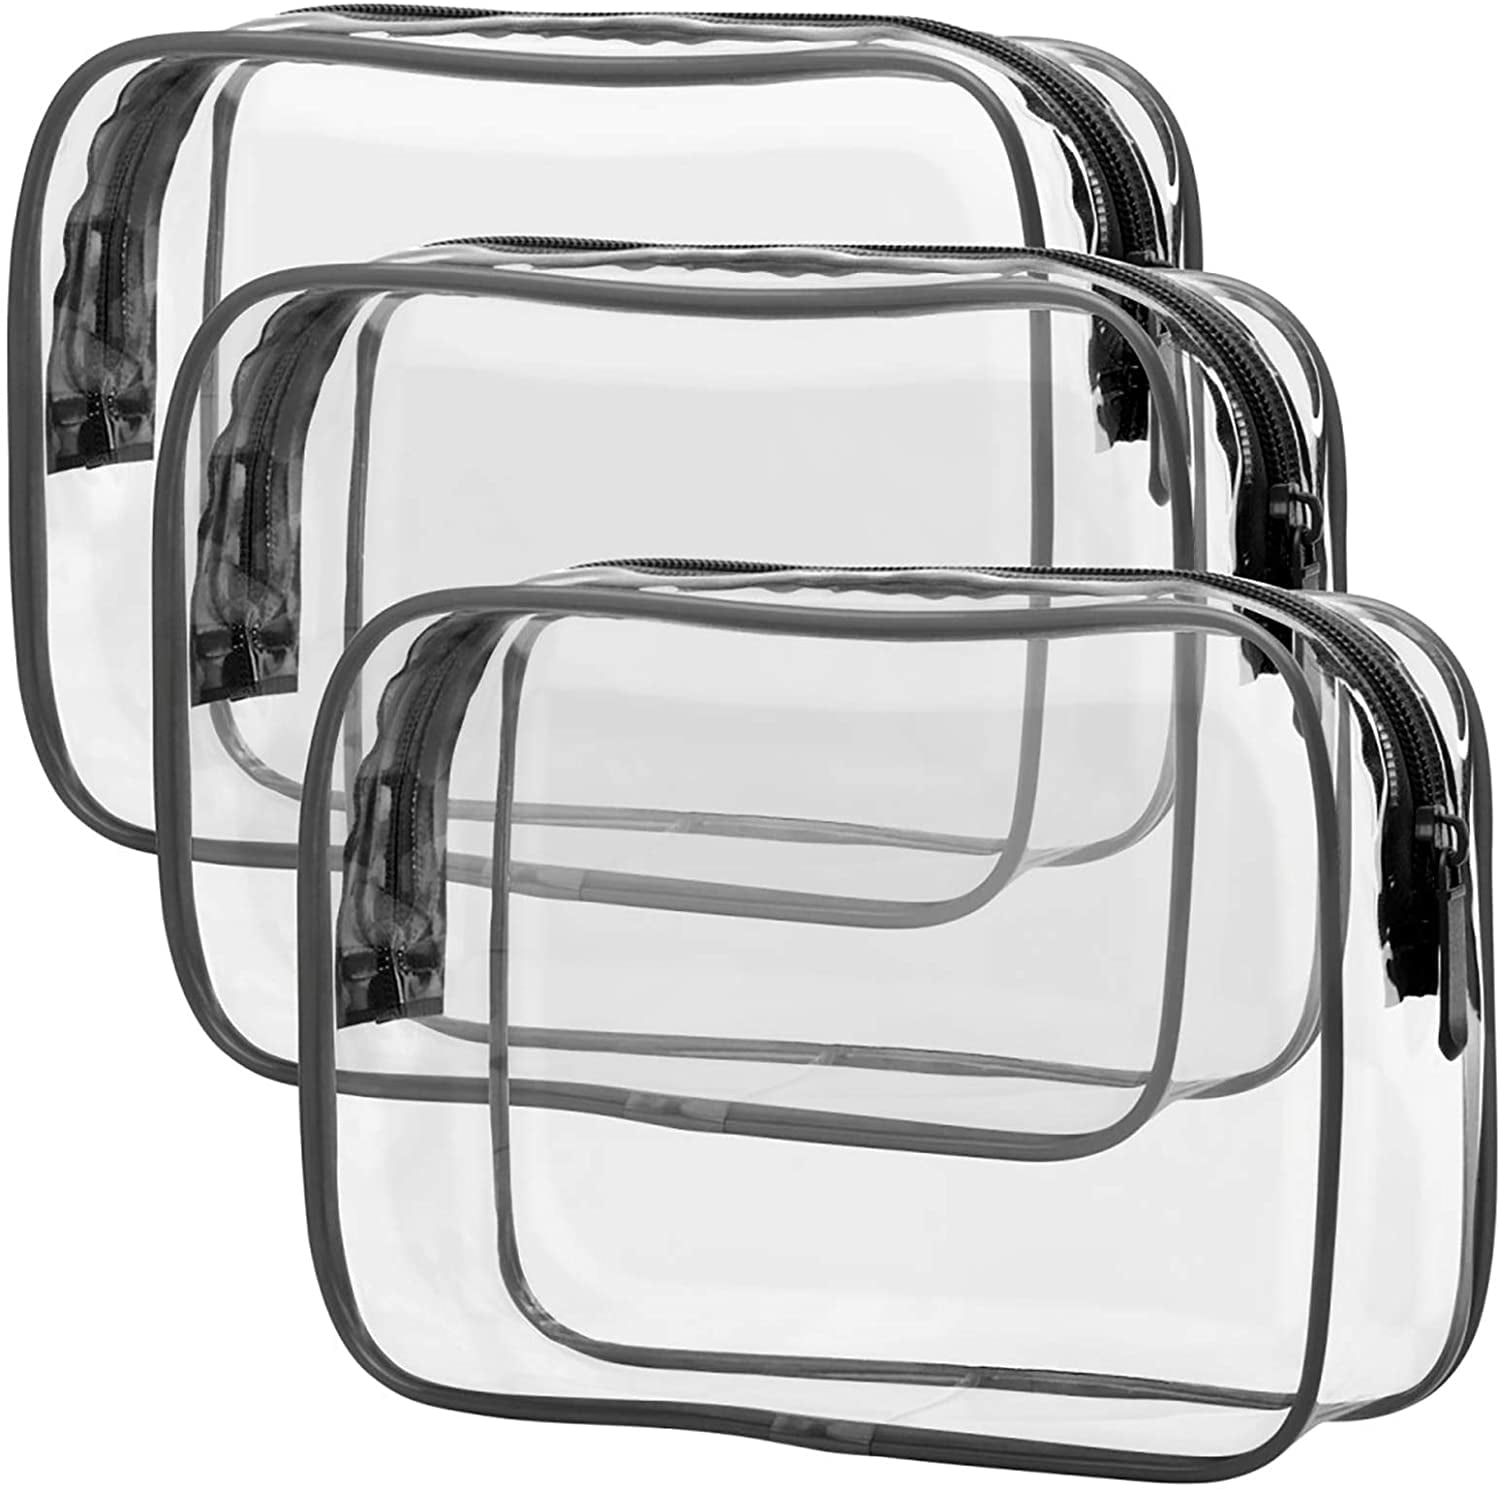 Clear TSA Approved 3-1-1 Travel Toiletry Bag for Carry On / Quart Size  Transparent Liquids Pouch for Airport Security / Reusable See Through Vinyl  